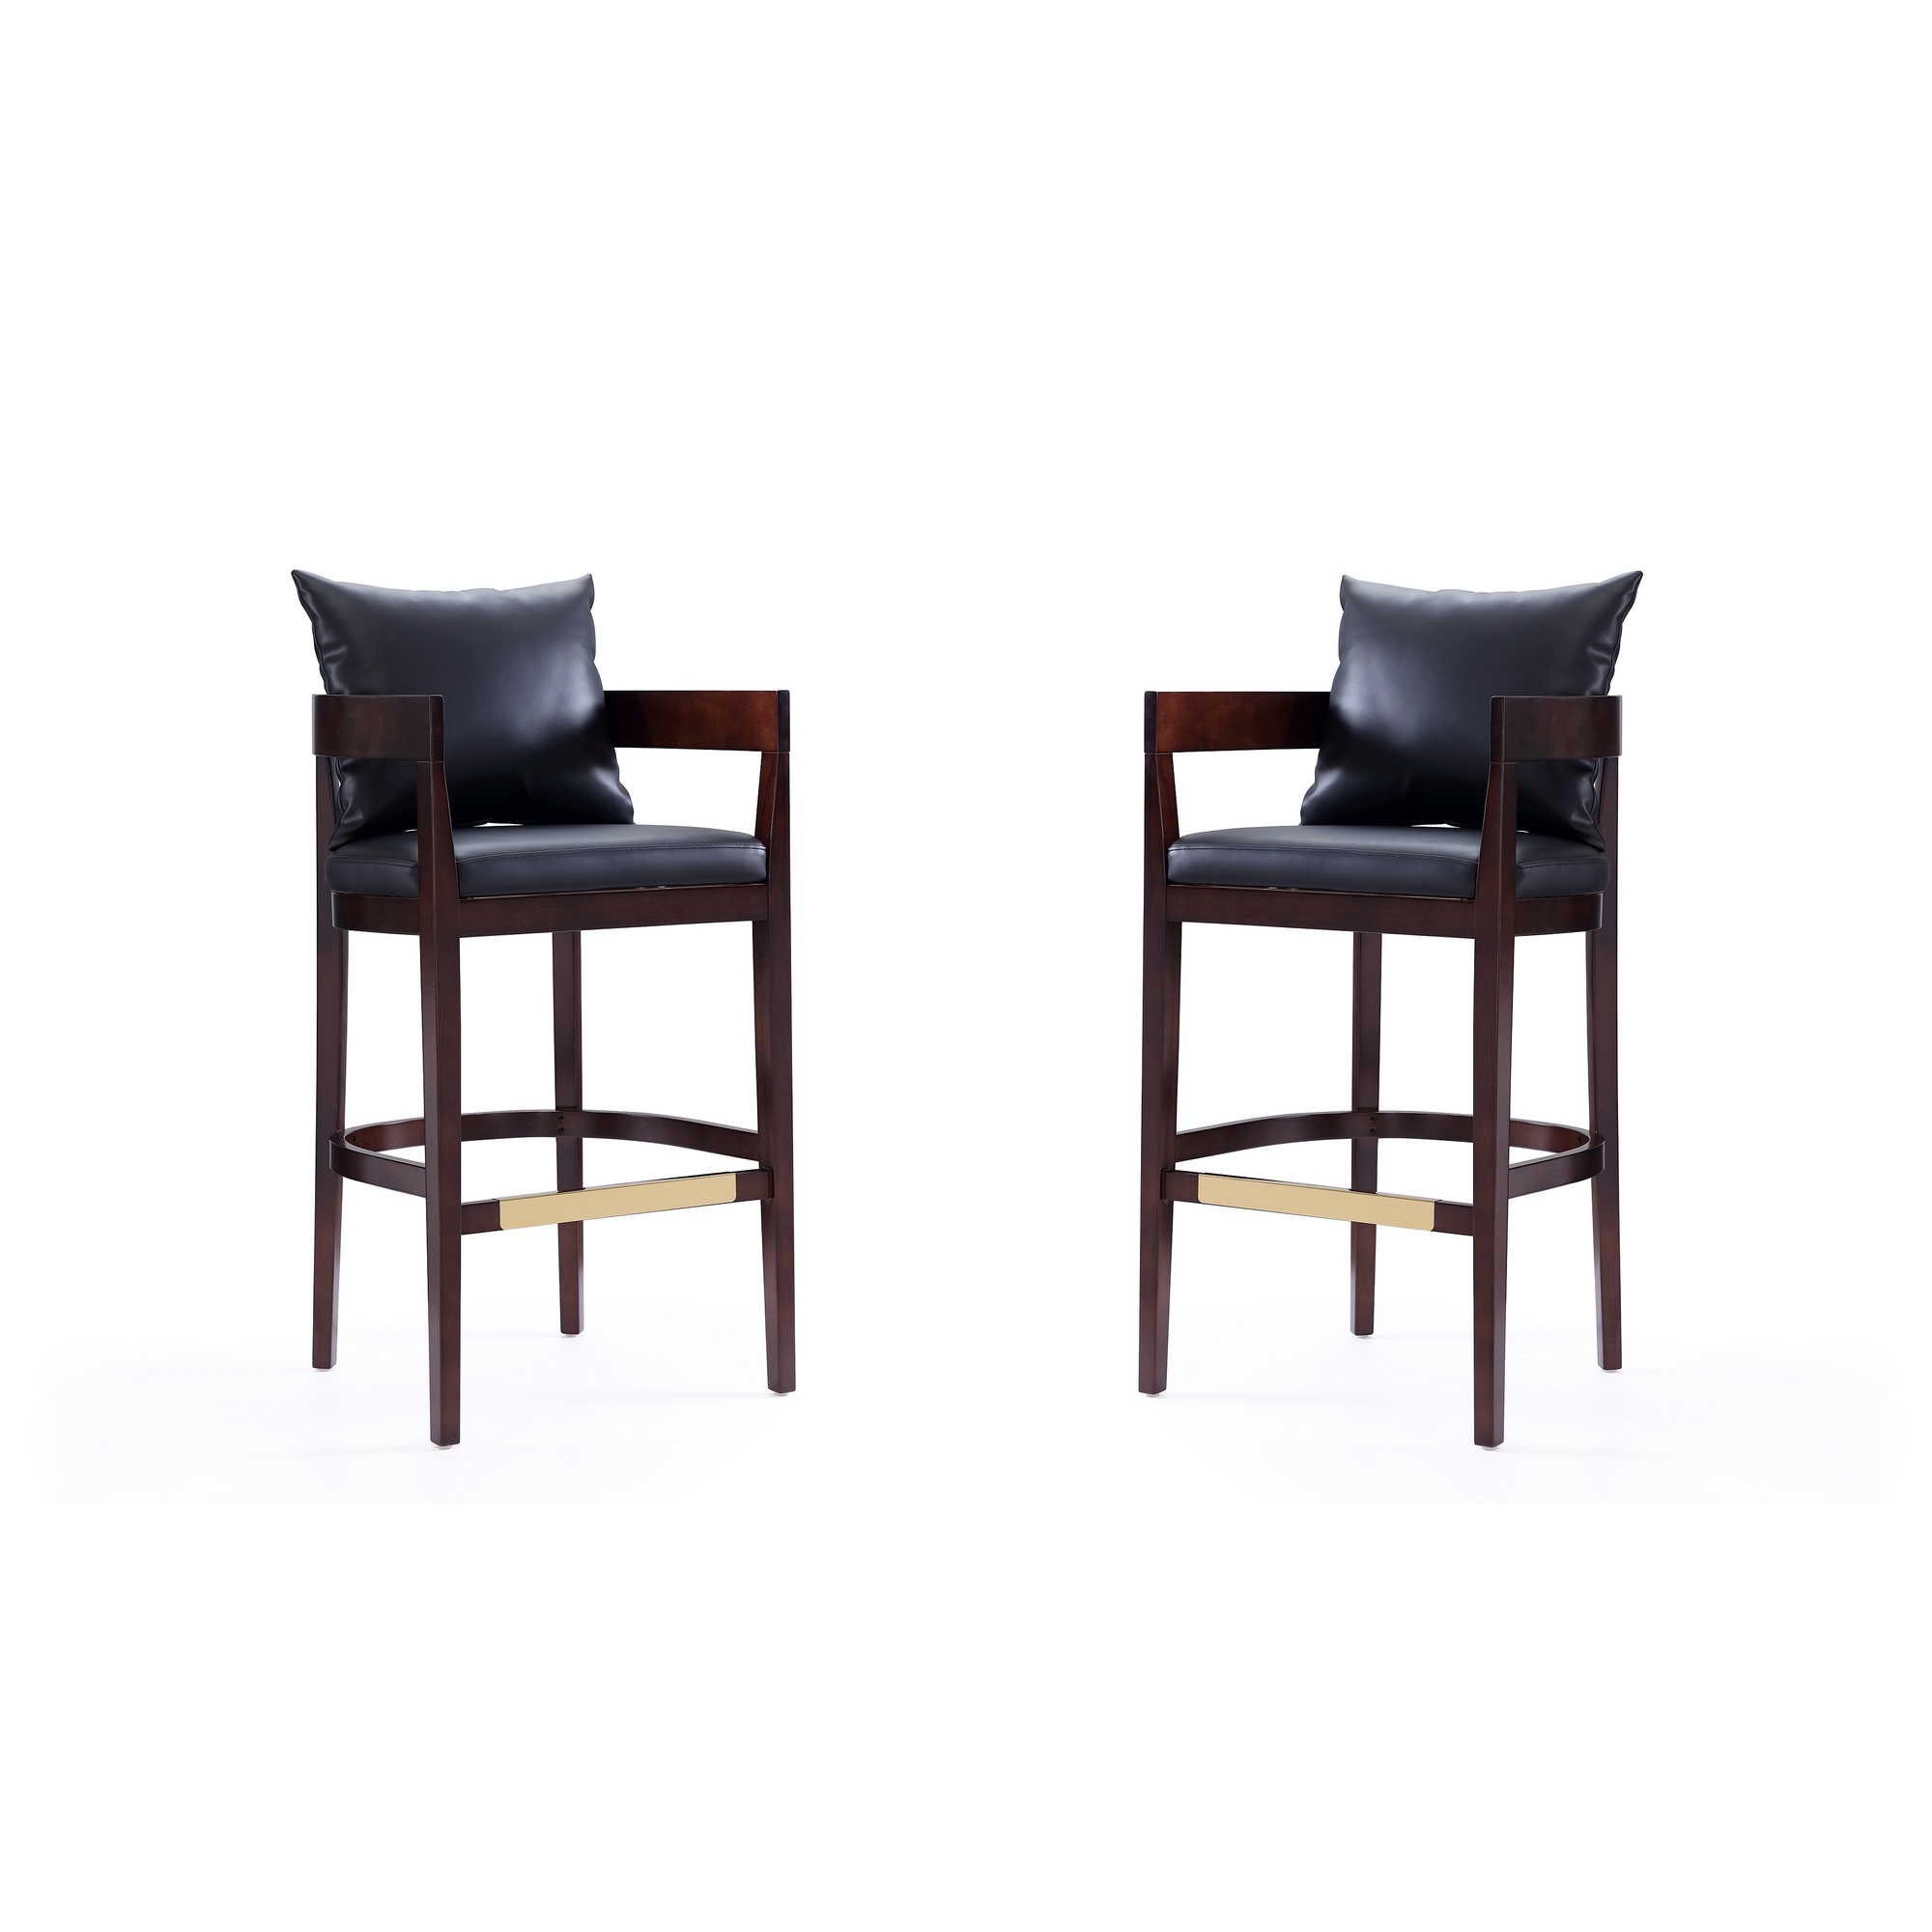 Manhattan Comfort, Ritz 38Inch Black Beech Wood Stool Set of 2 Primary Color Black, Included (qty.) 2 Model 2-BS013